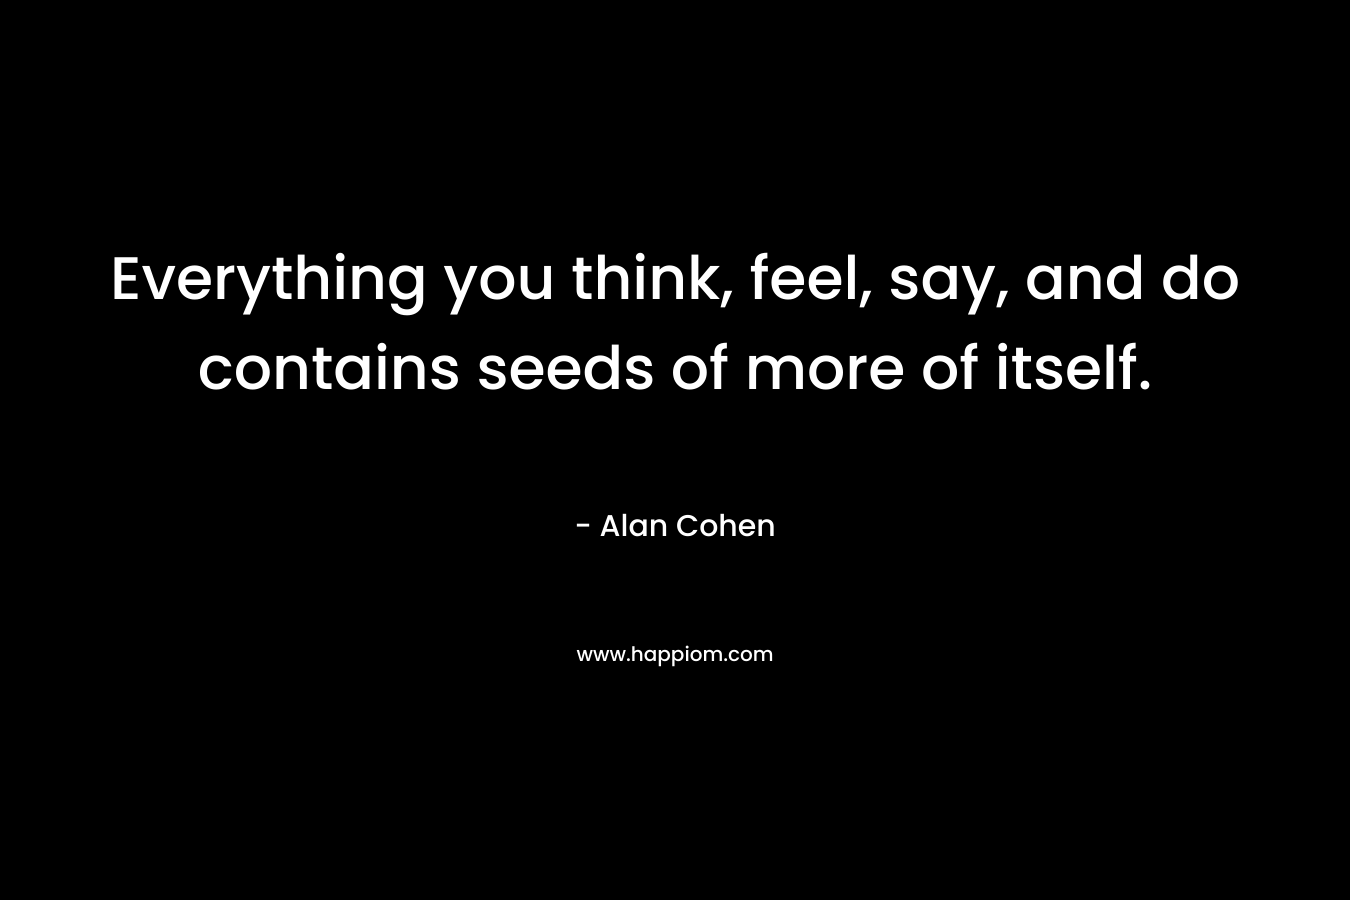 Everything you think, feel, say, and do contains seeds of more of itself.